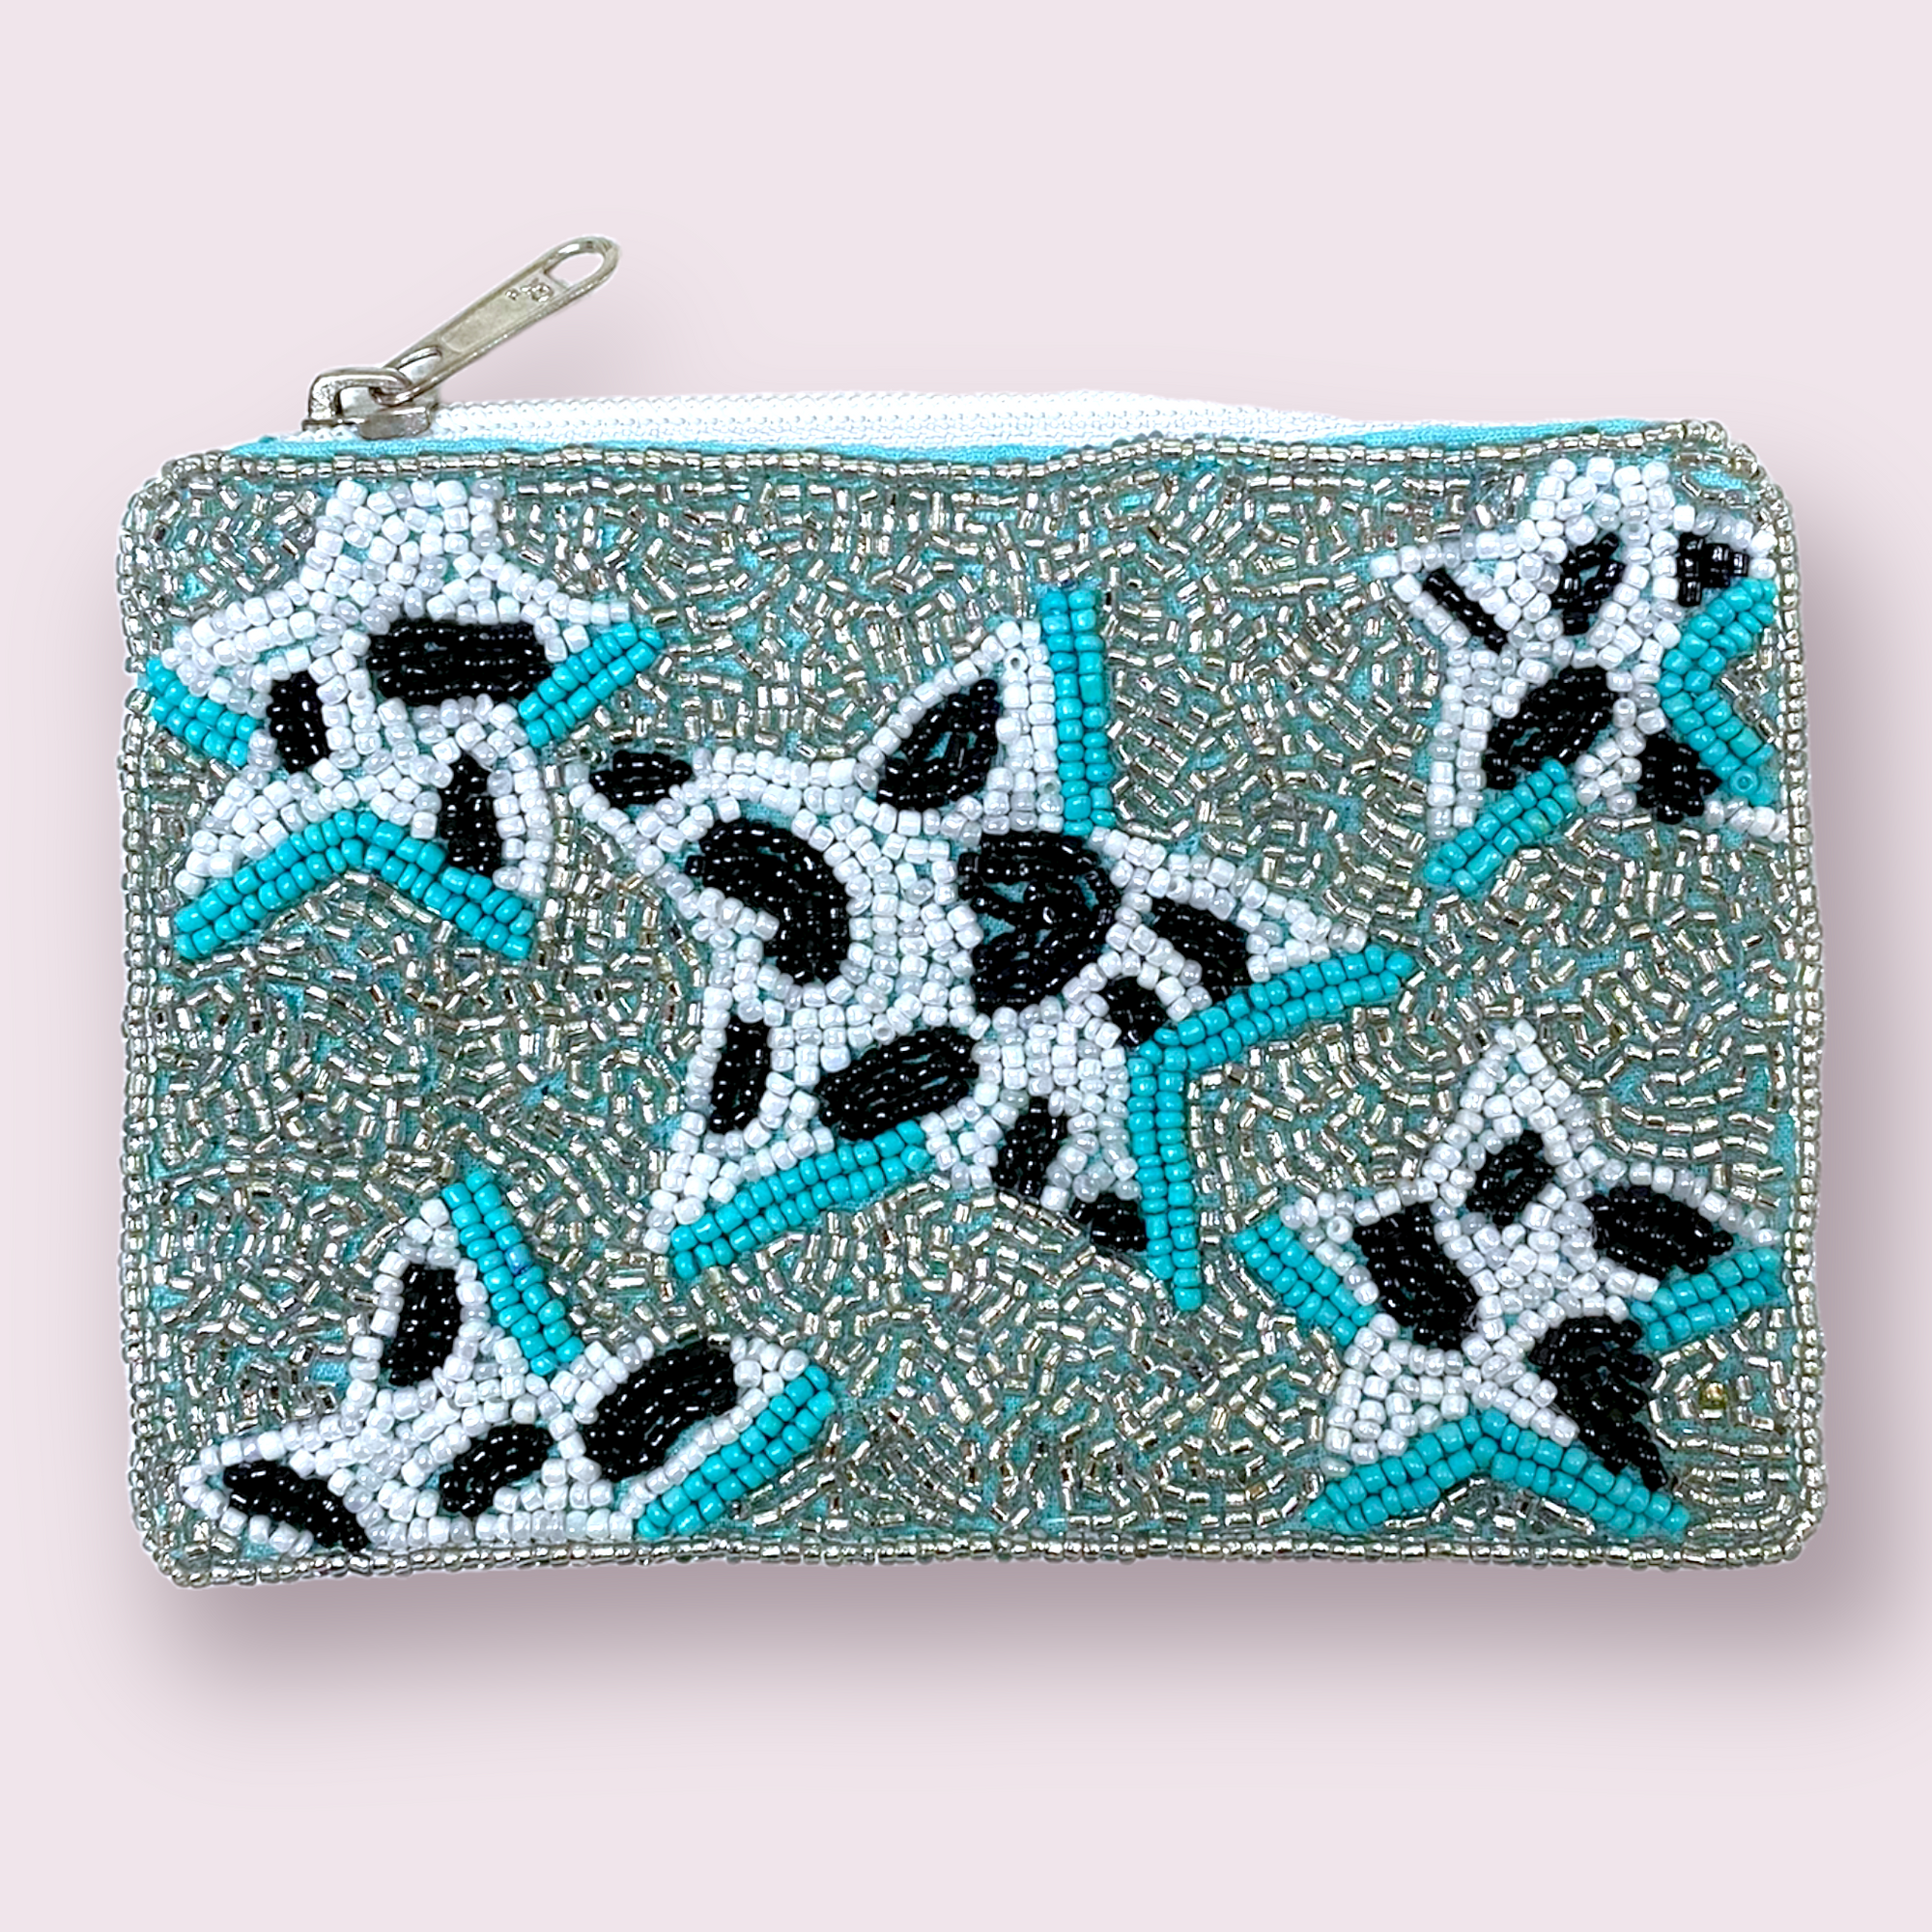 Cowgirl Star Seed Bead Coin Purse